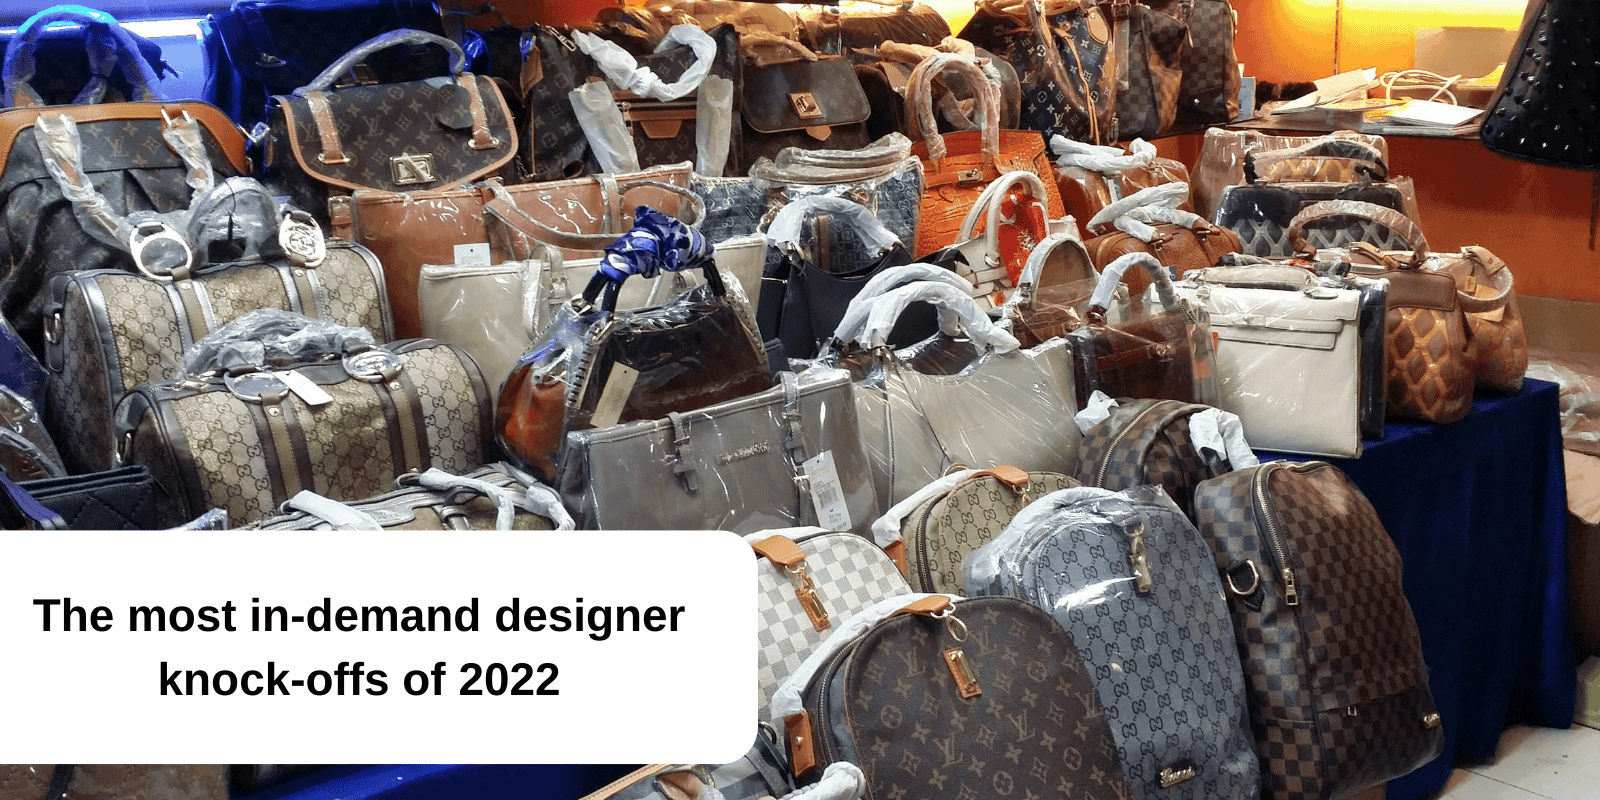 Fake designer products 2022 & how to avoid them